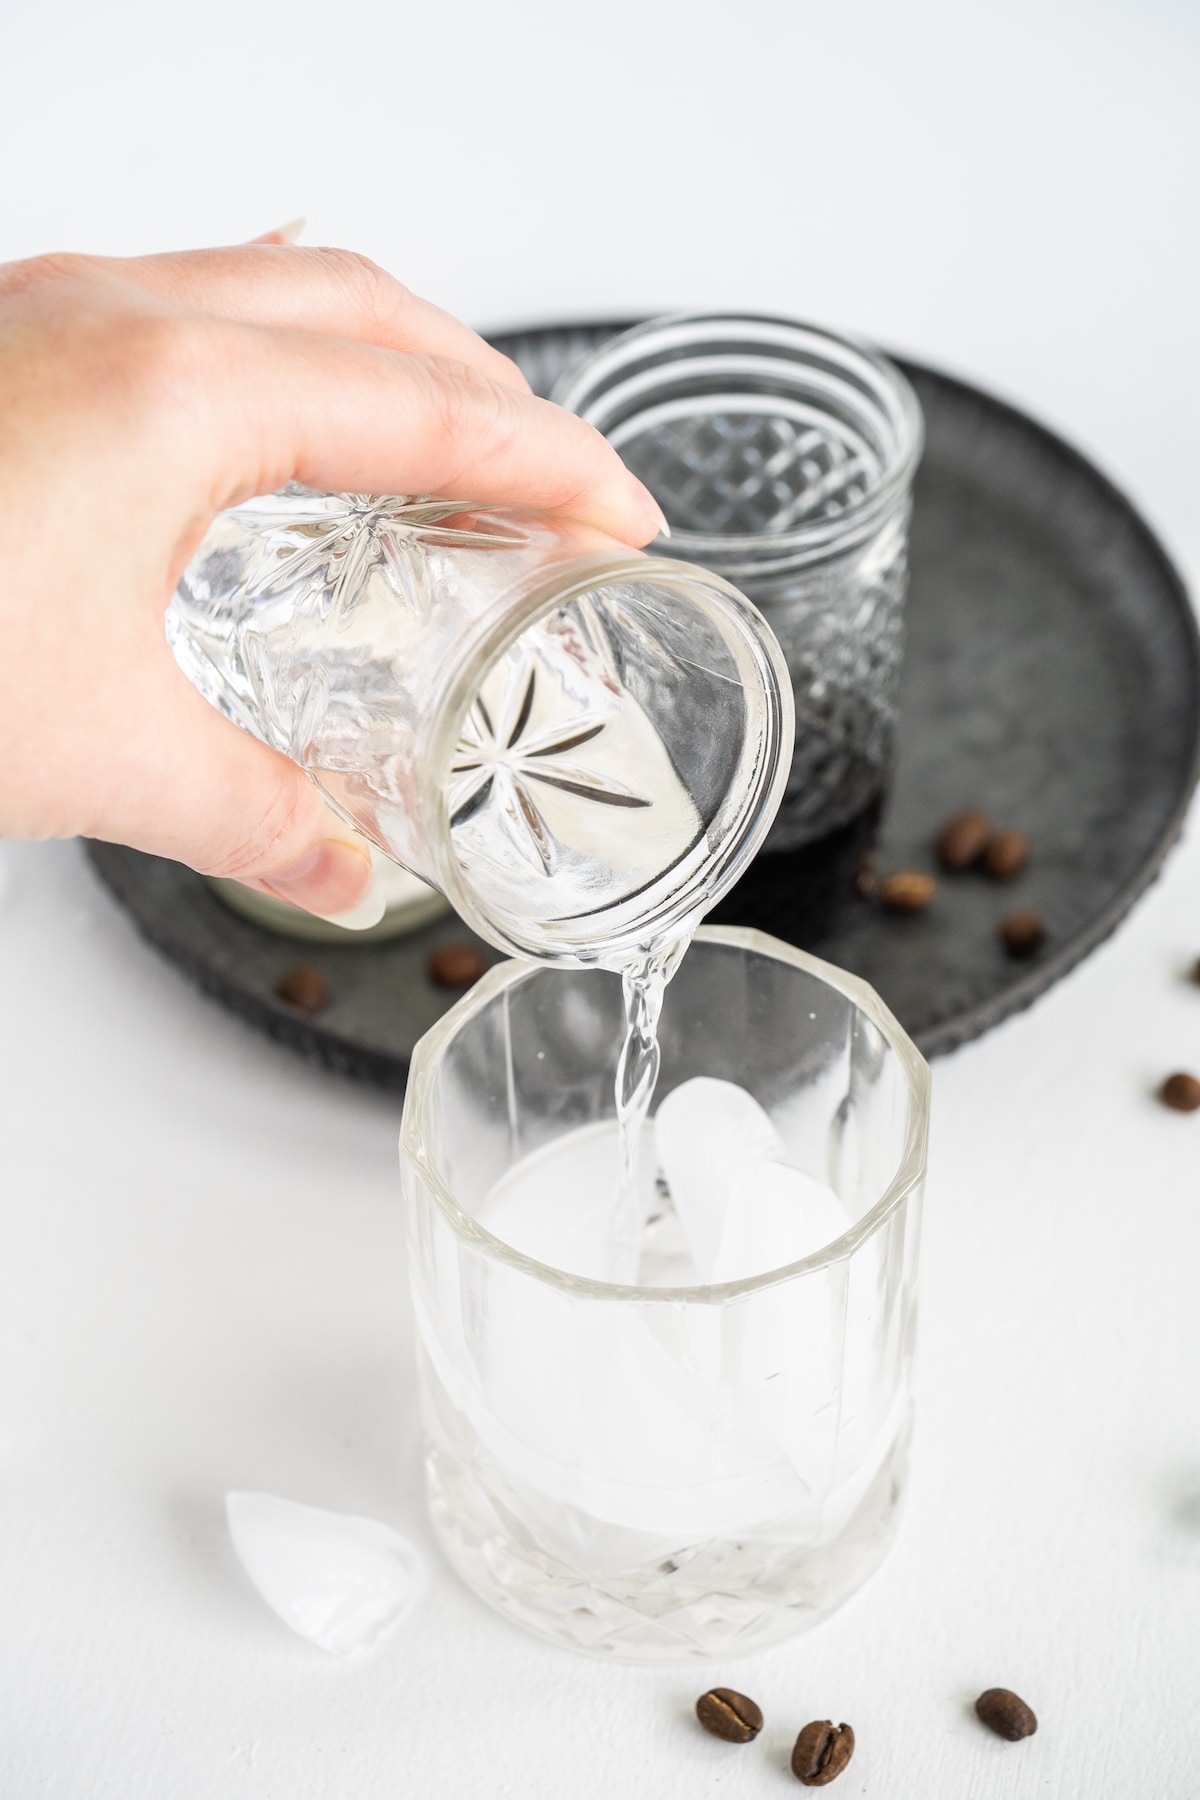 Vodka being poured into a cocktail glass to make a white russian